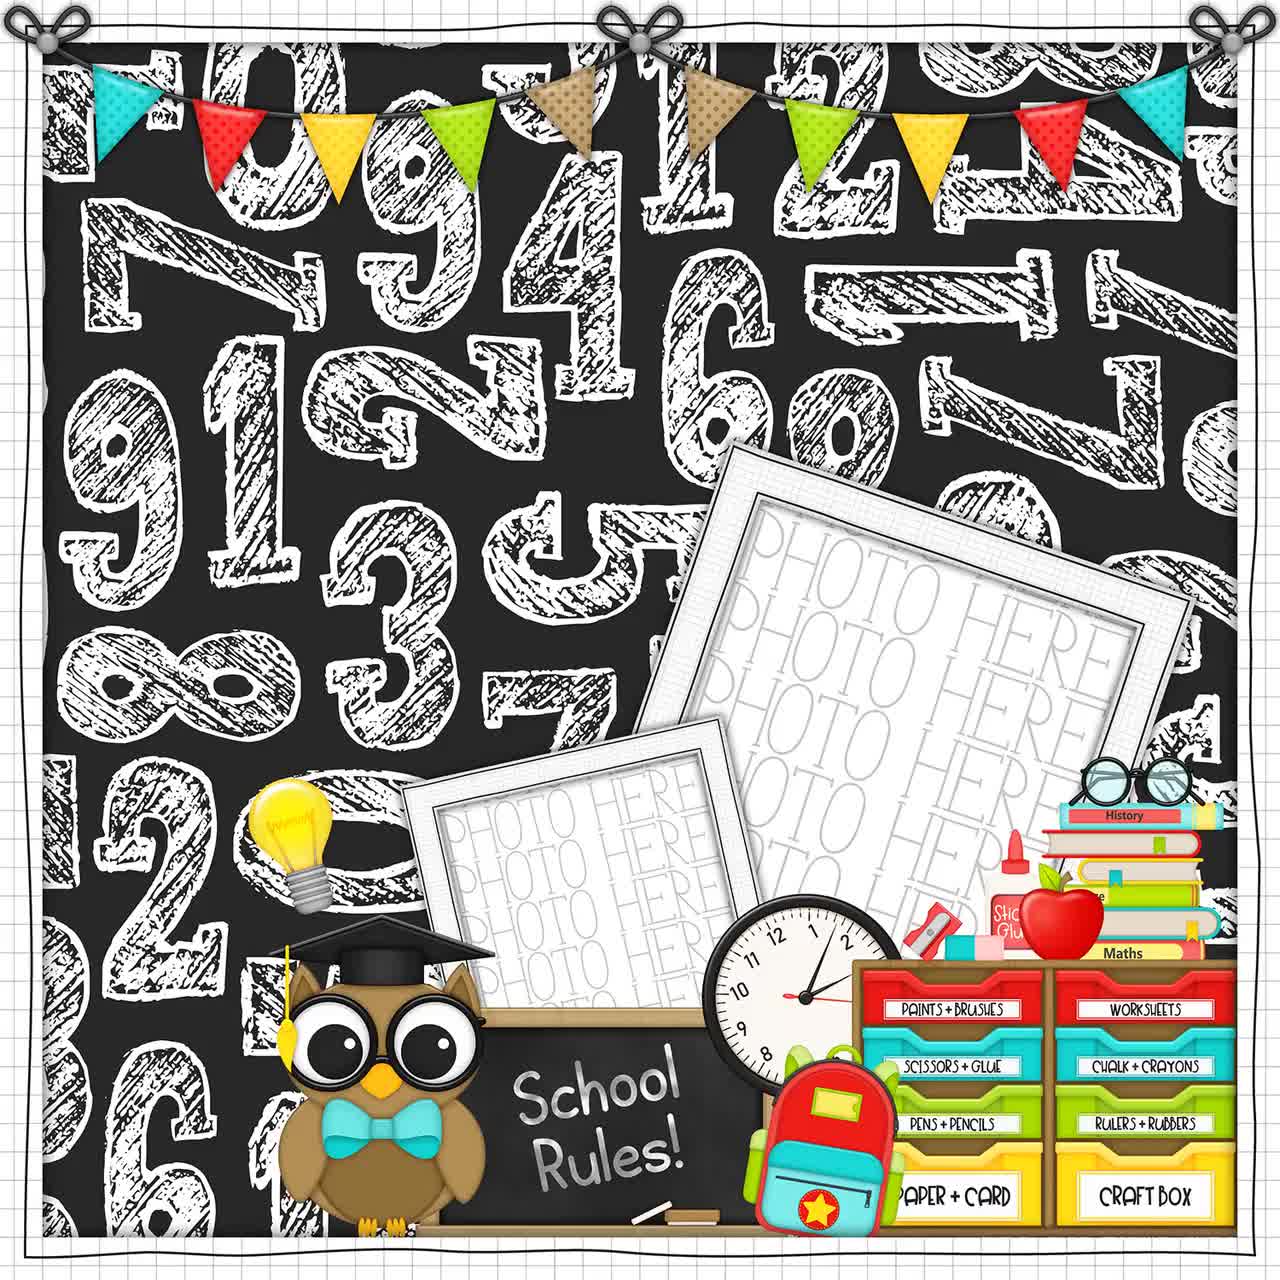 Boys Digital Scrapbook Kit. Boys, Teens Themed Scrapbook Kit, Digital  Papers, Clip Art, Word Tags and More. INSTANT DOWNLOAD -  Sweden